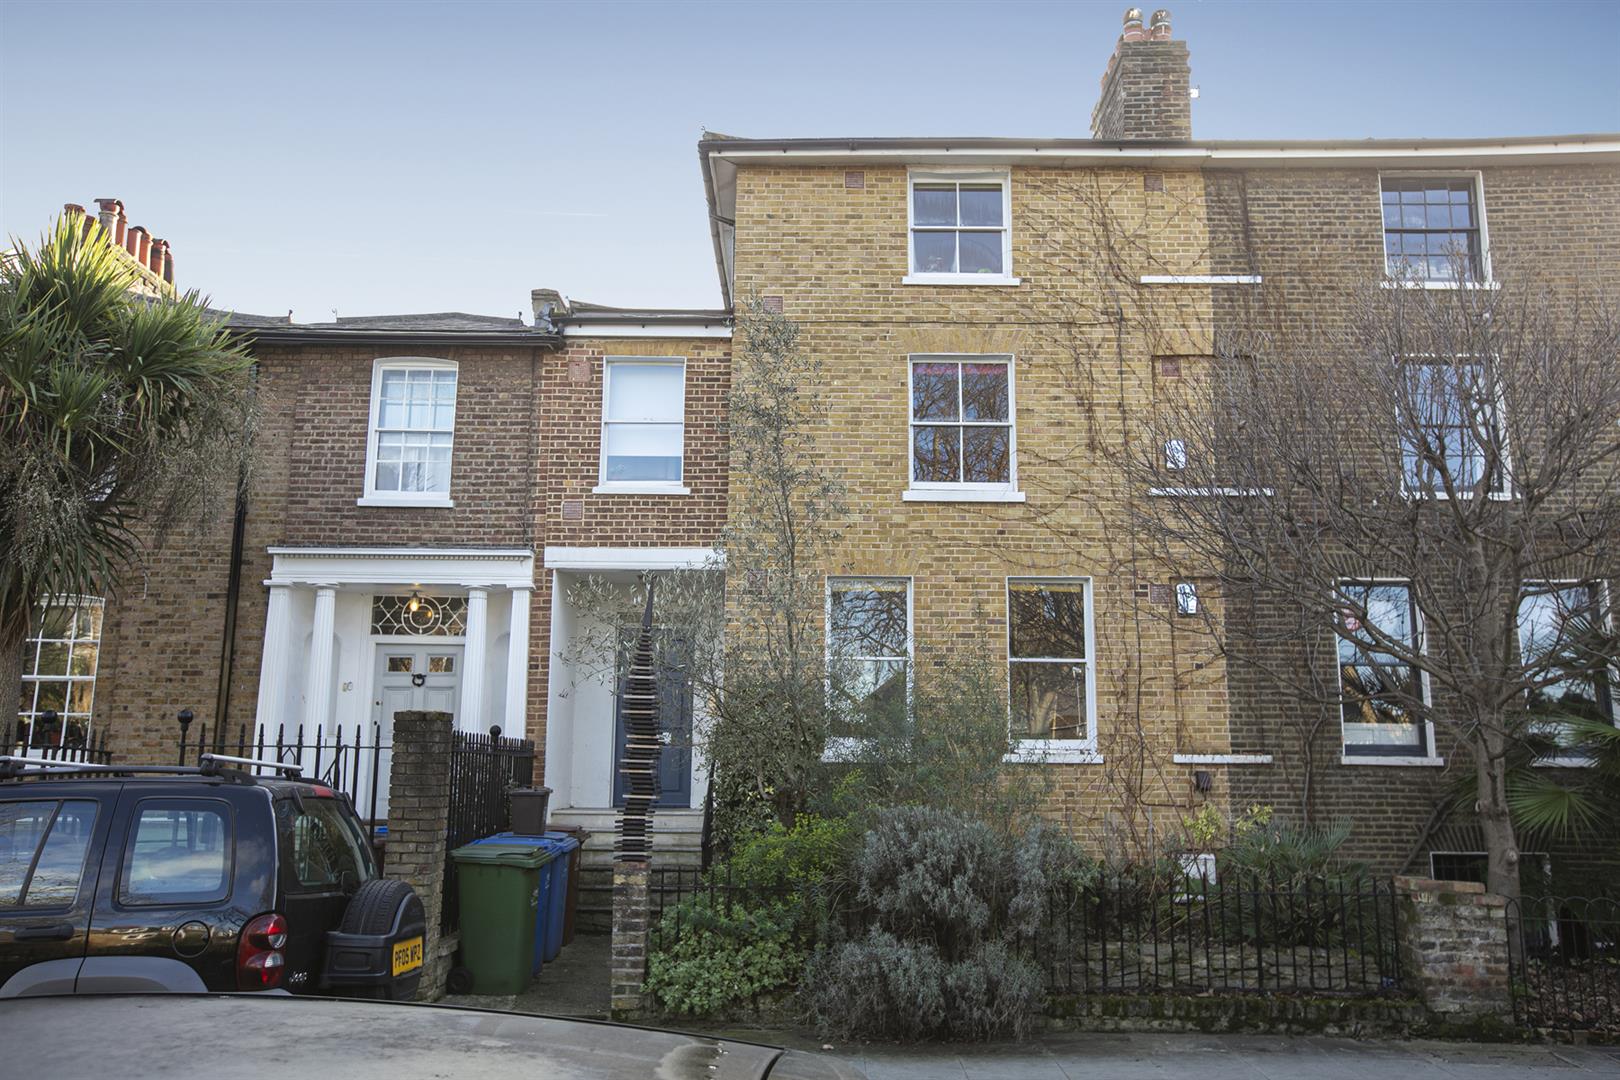 Flat - Conversion Under Offer in Holly Grove, Peckham, SE15 893 view1